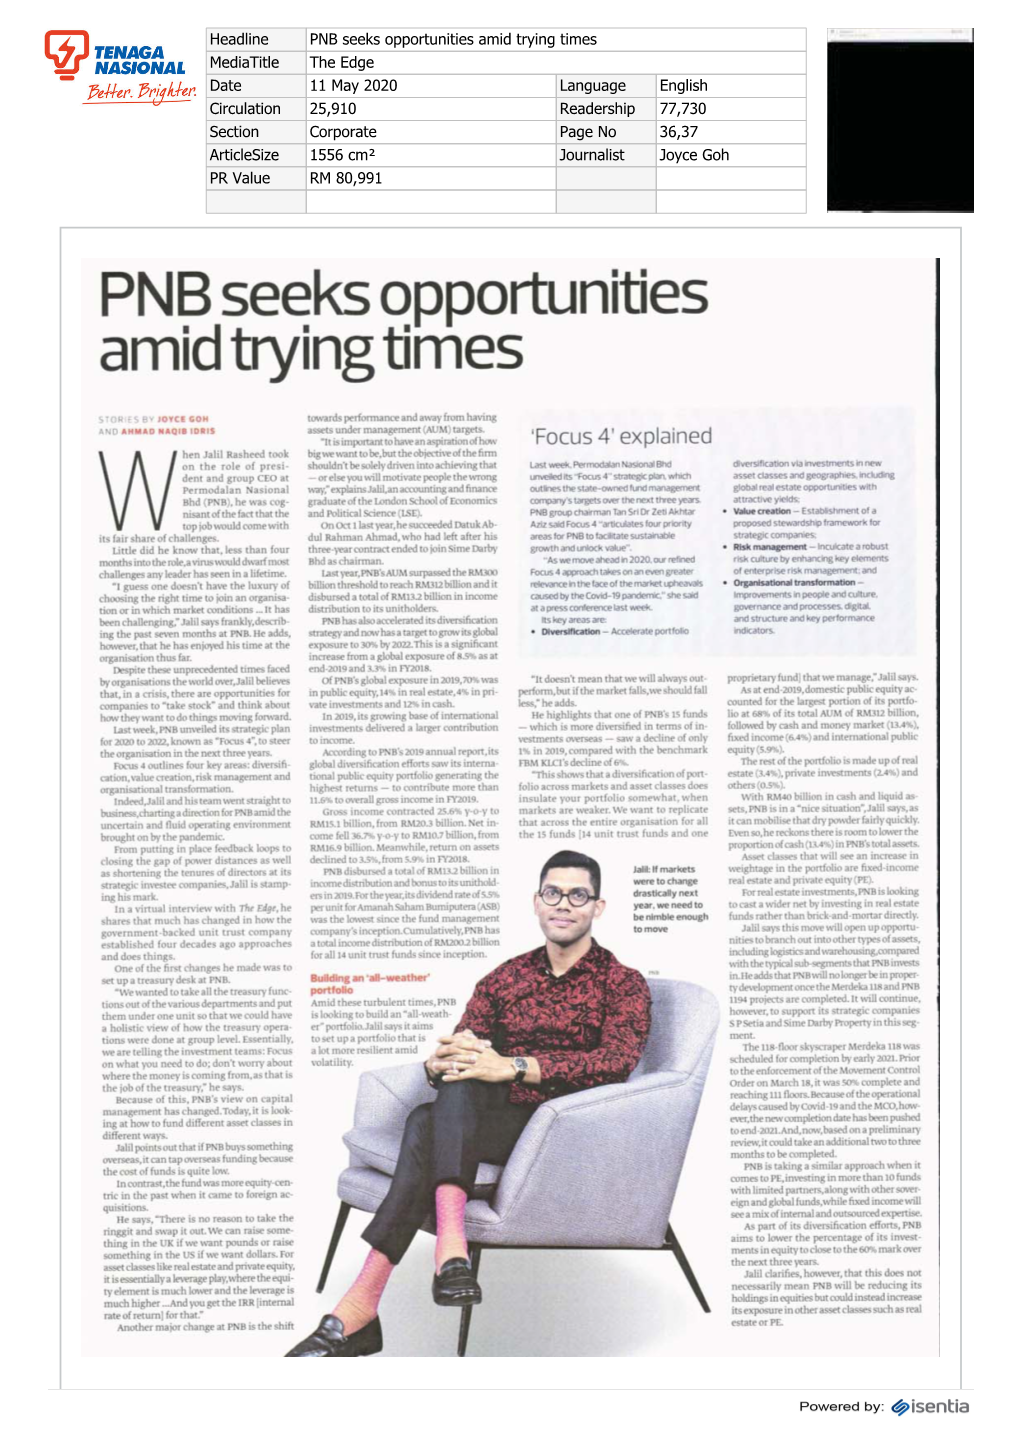 PNB Seeks Opportunities Amid Trying Times